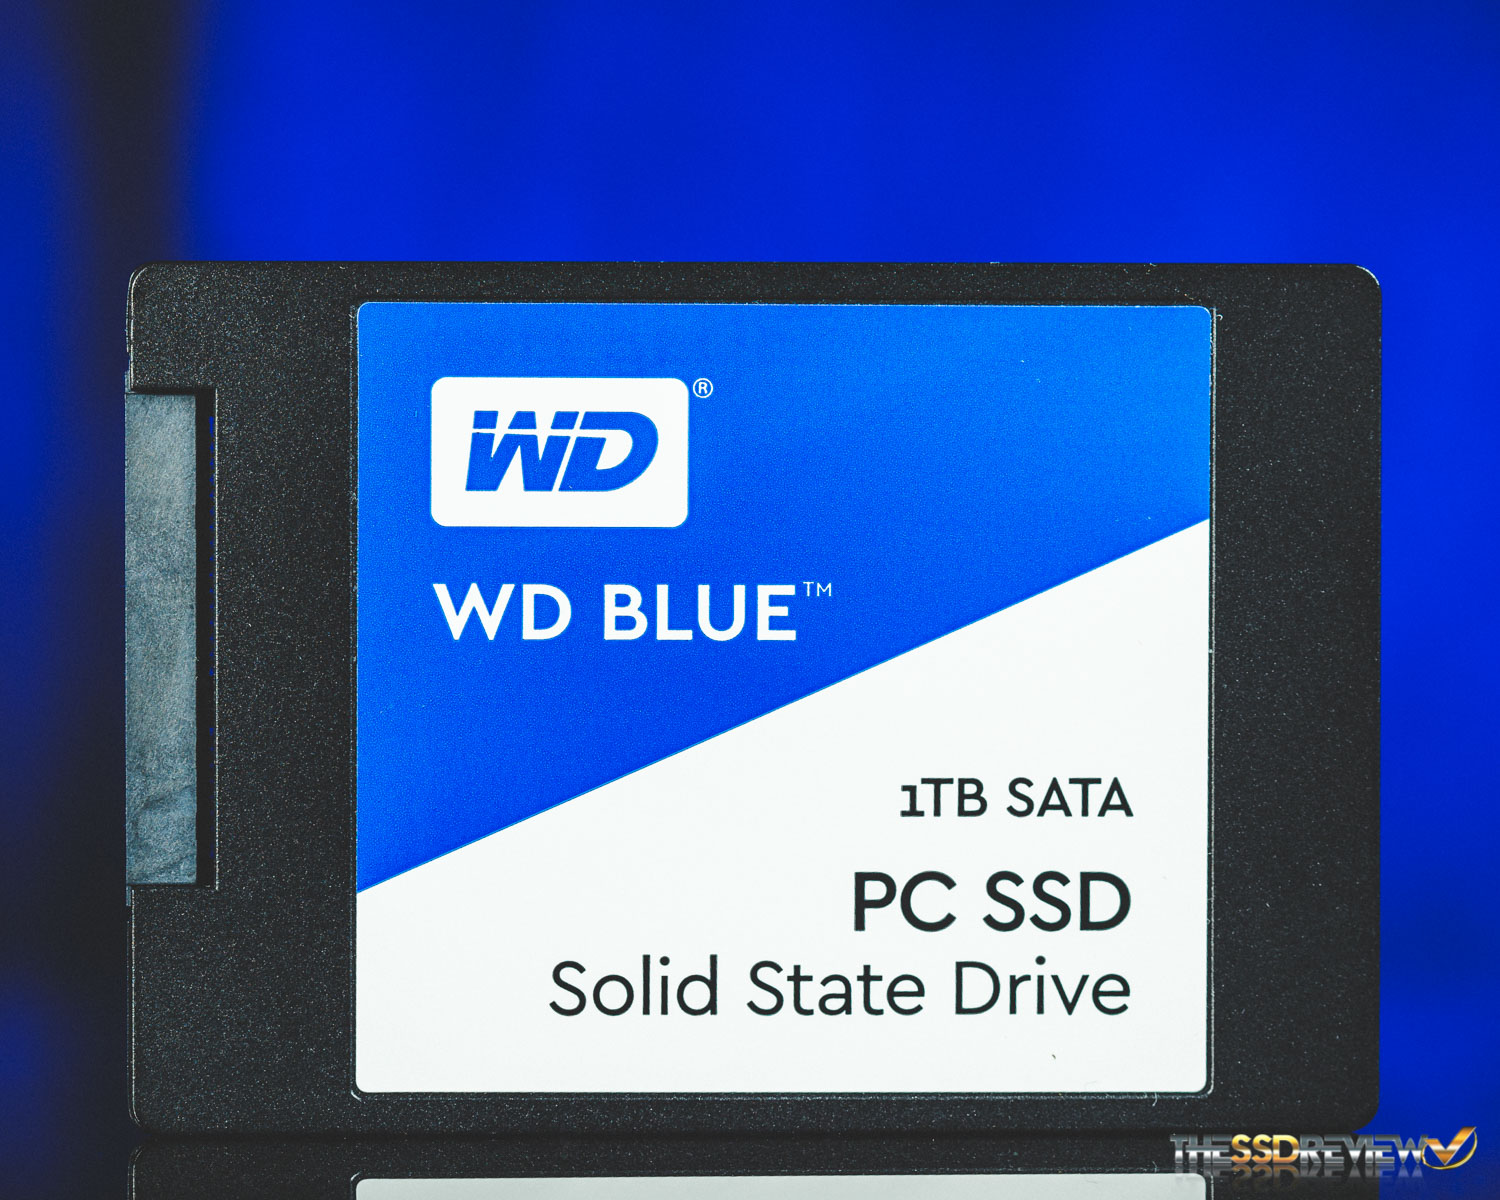 WD Blue SSD Review (1TB) - WD Steps Into The Ring | The SSD Review